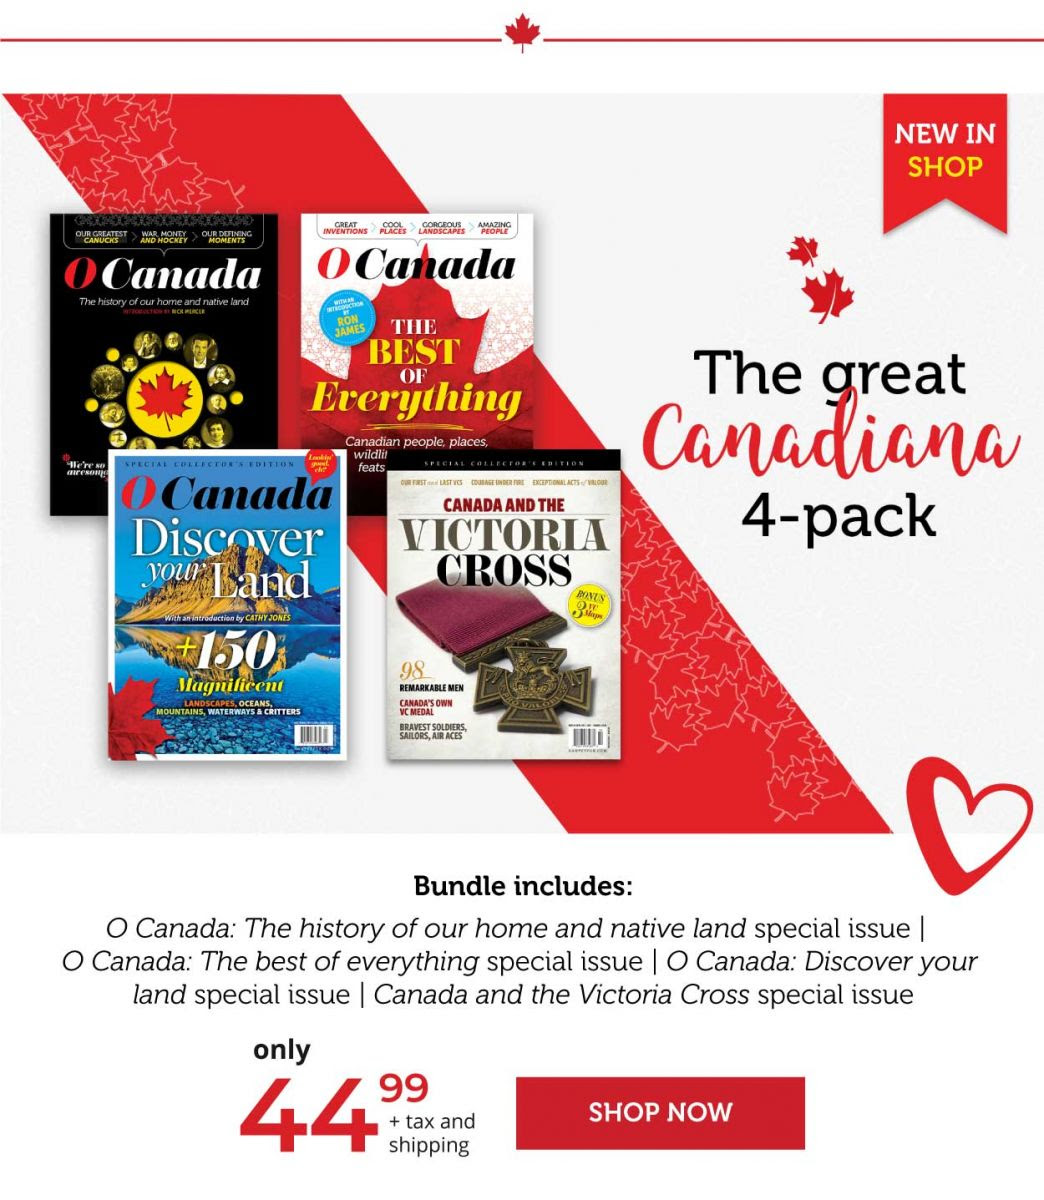 The Great Canadiana 4-Pack